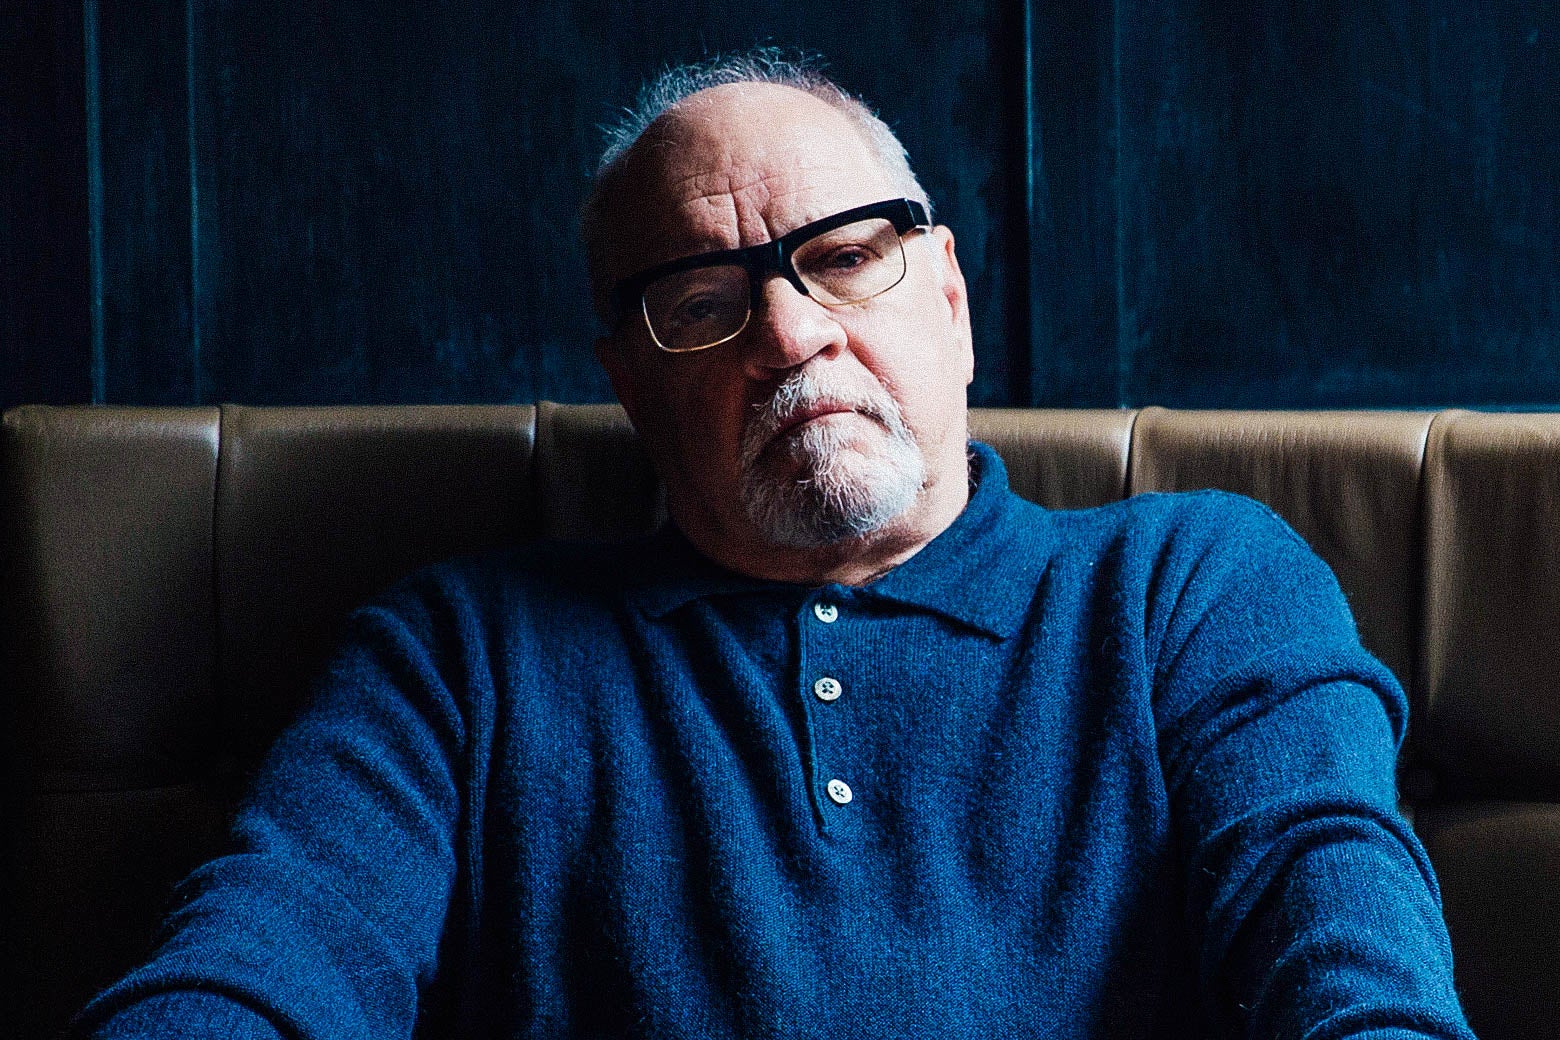 Paul Schrader in a blue shirt on a brown couch.